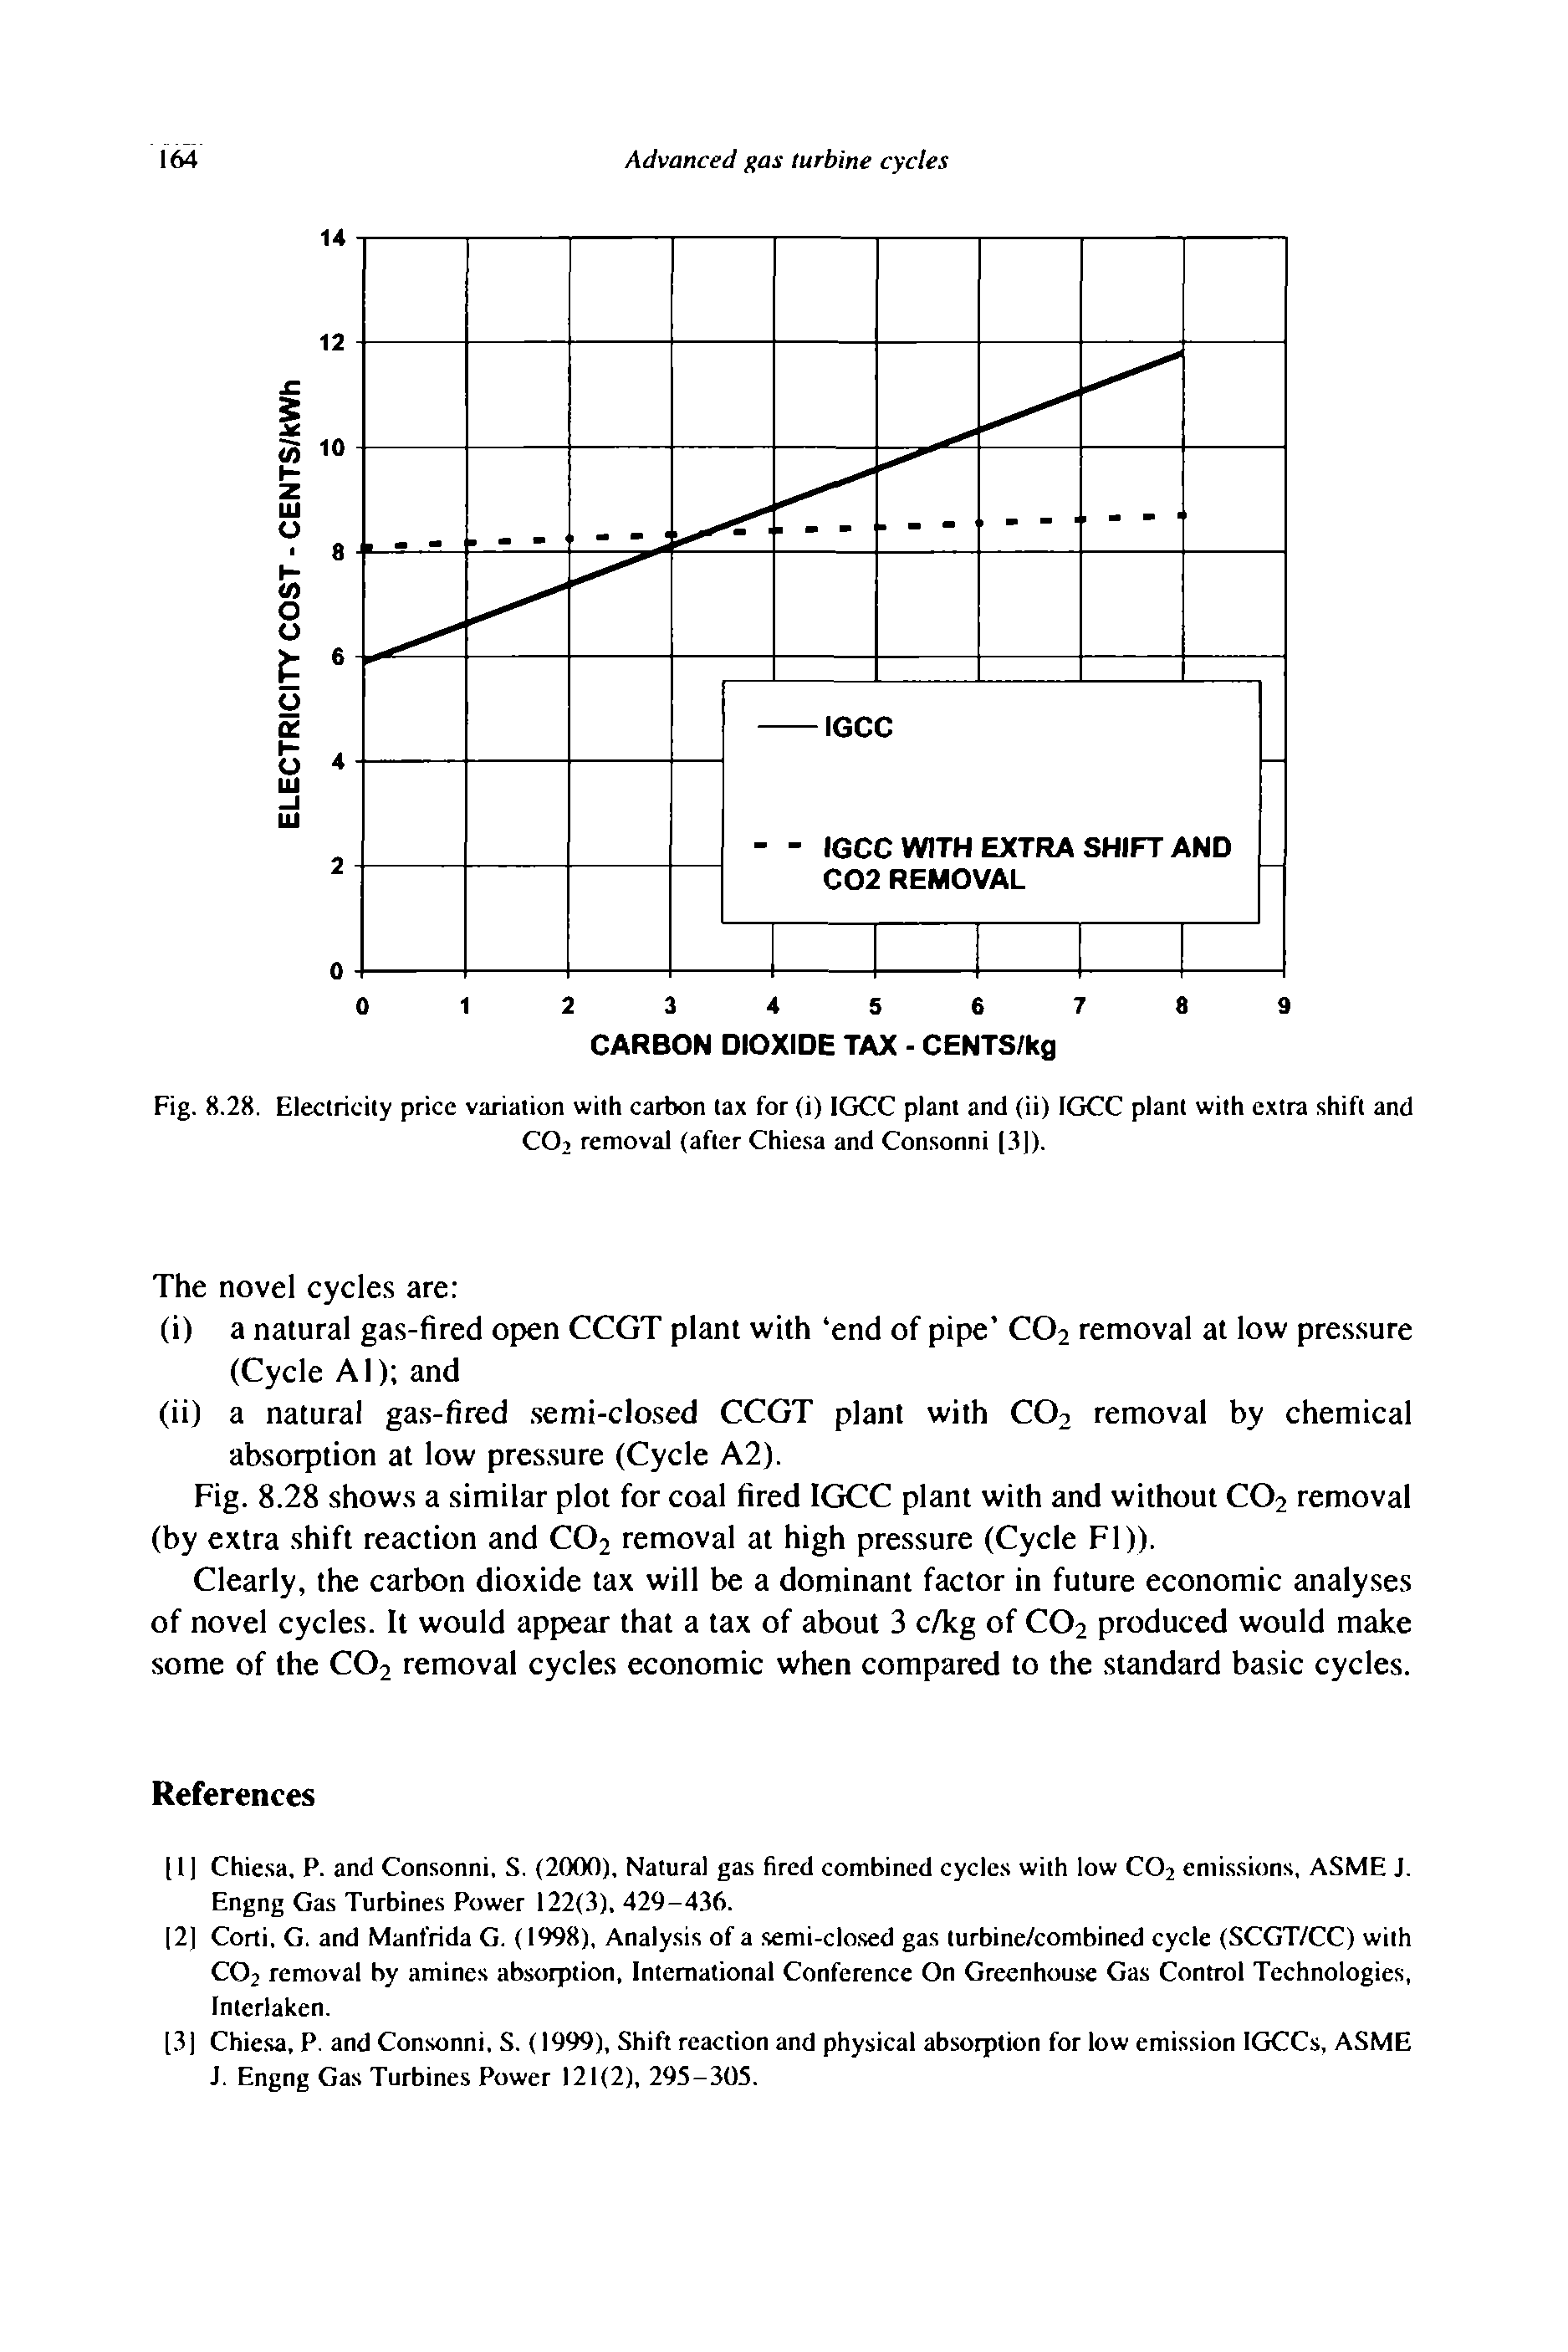 Fig. 8.28. Electricity price variation with carbon tax for (i) IGCC plant and (ii) IGCC plant with extra shift and COi removal (after Chic.sa and Consonni l.3 ).